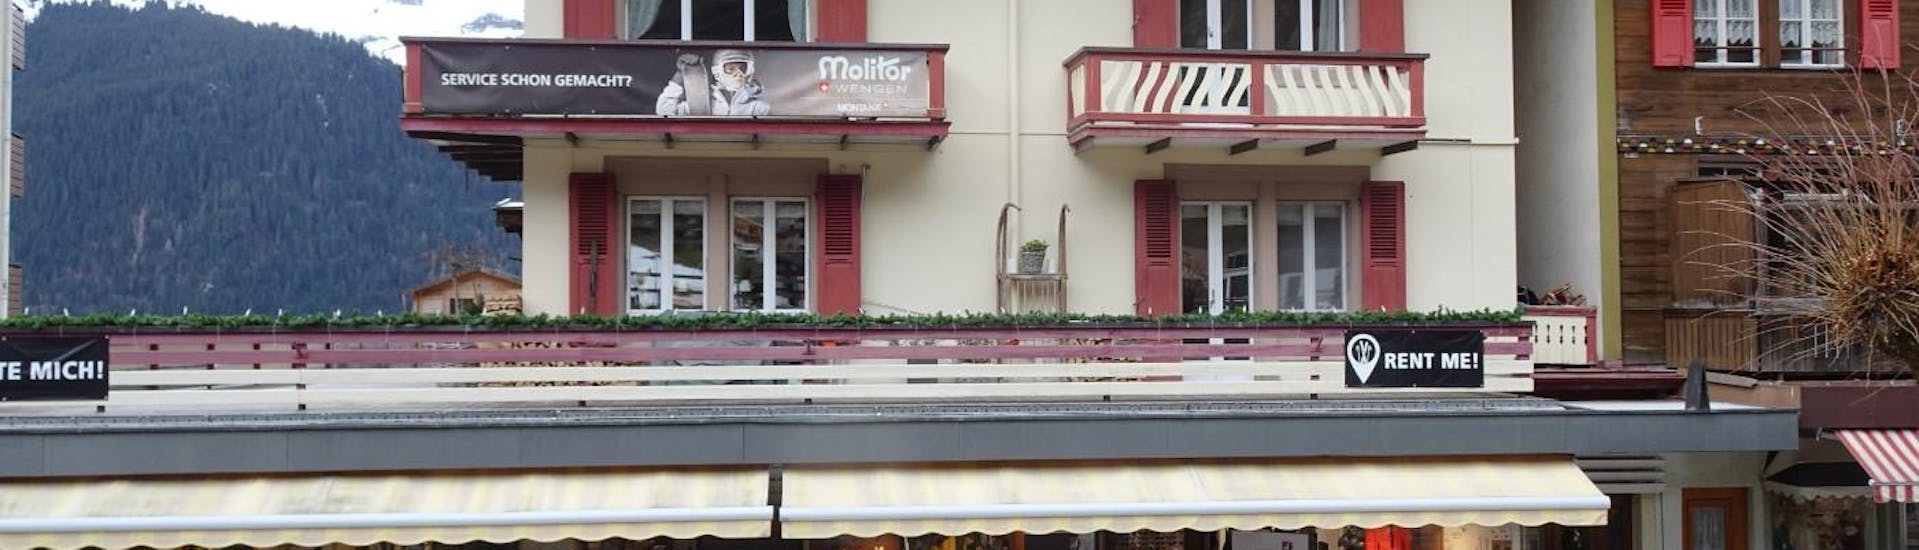 The outside of Ski Rental Molitor Wengen, where you can rent skis and snowboards.